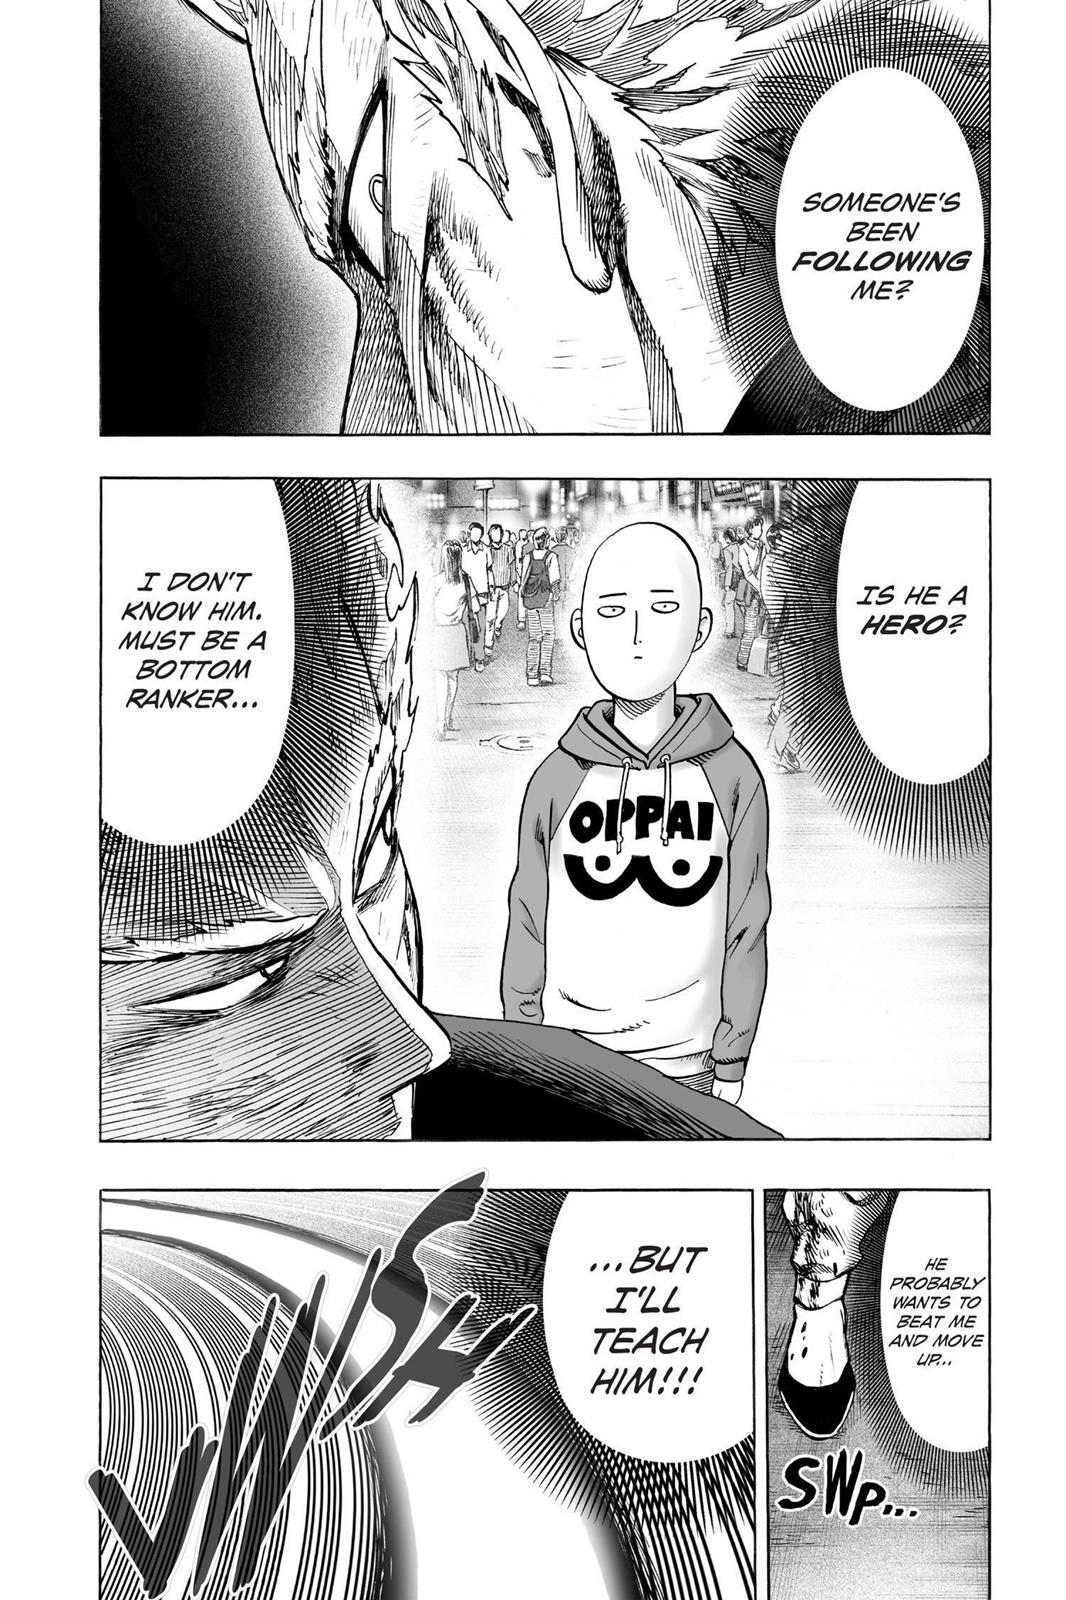 One-Punch Man, Punch 51 image 06